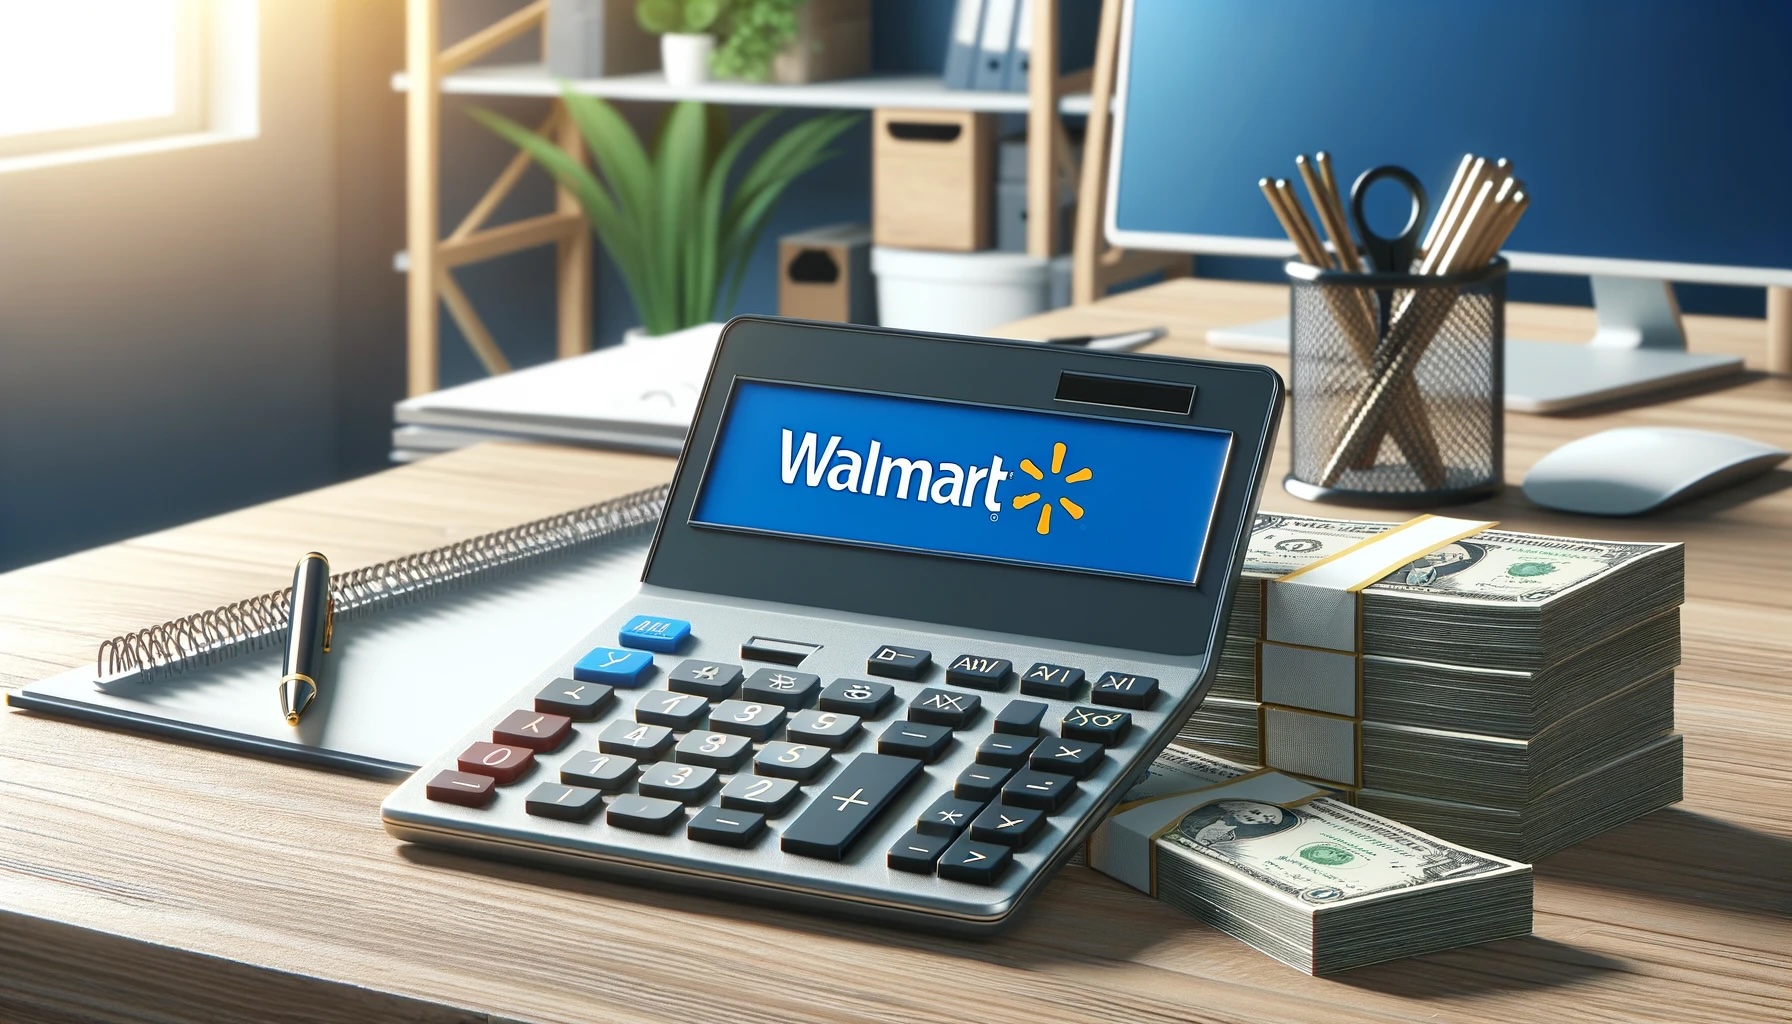 A graphic image of a Walmart branded calculator on a desk surrounded by banded packs of $100 bills